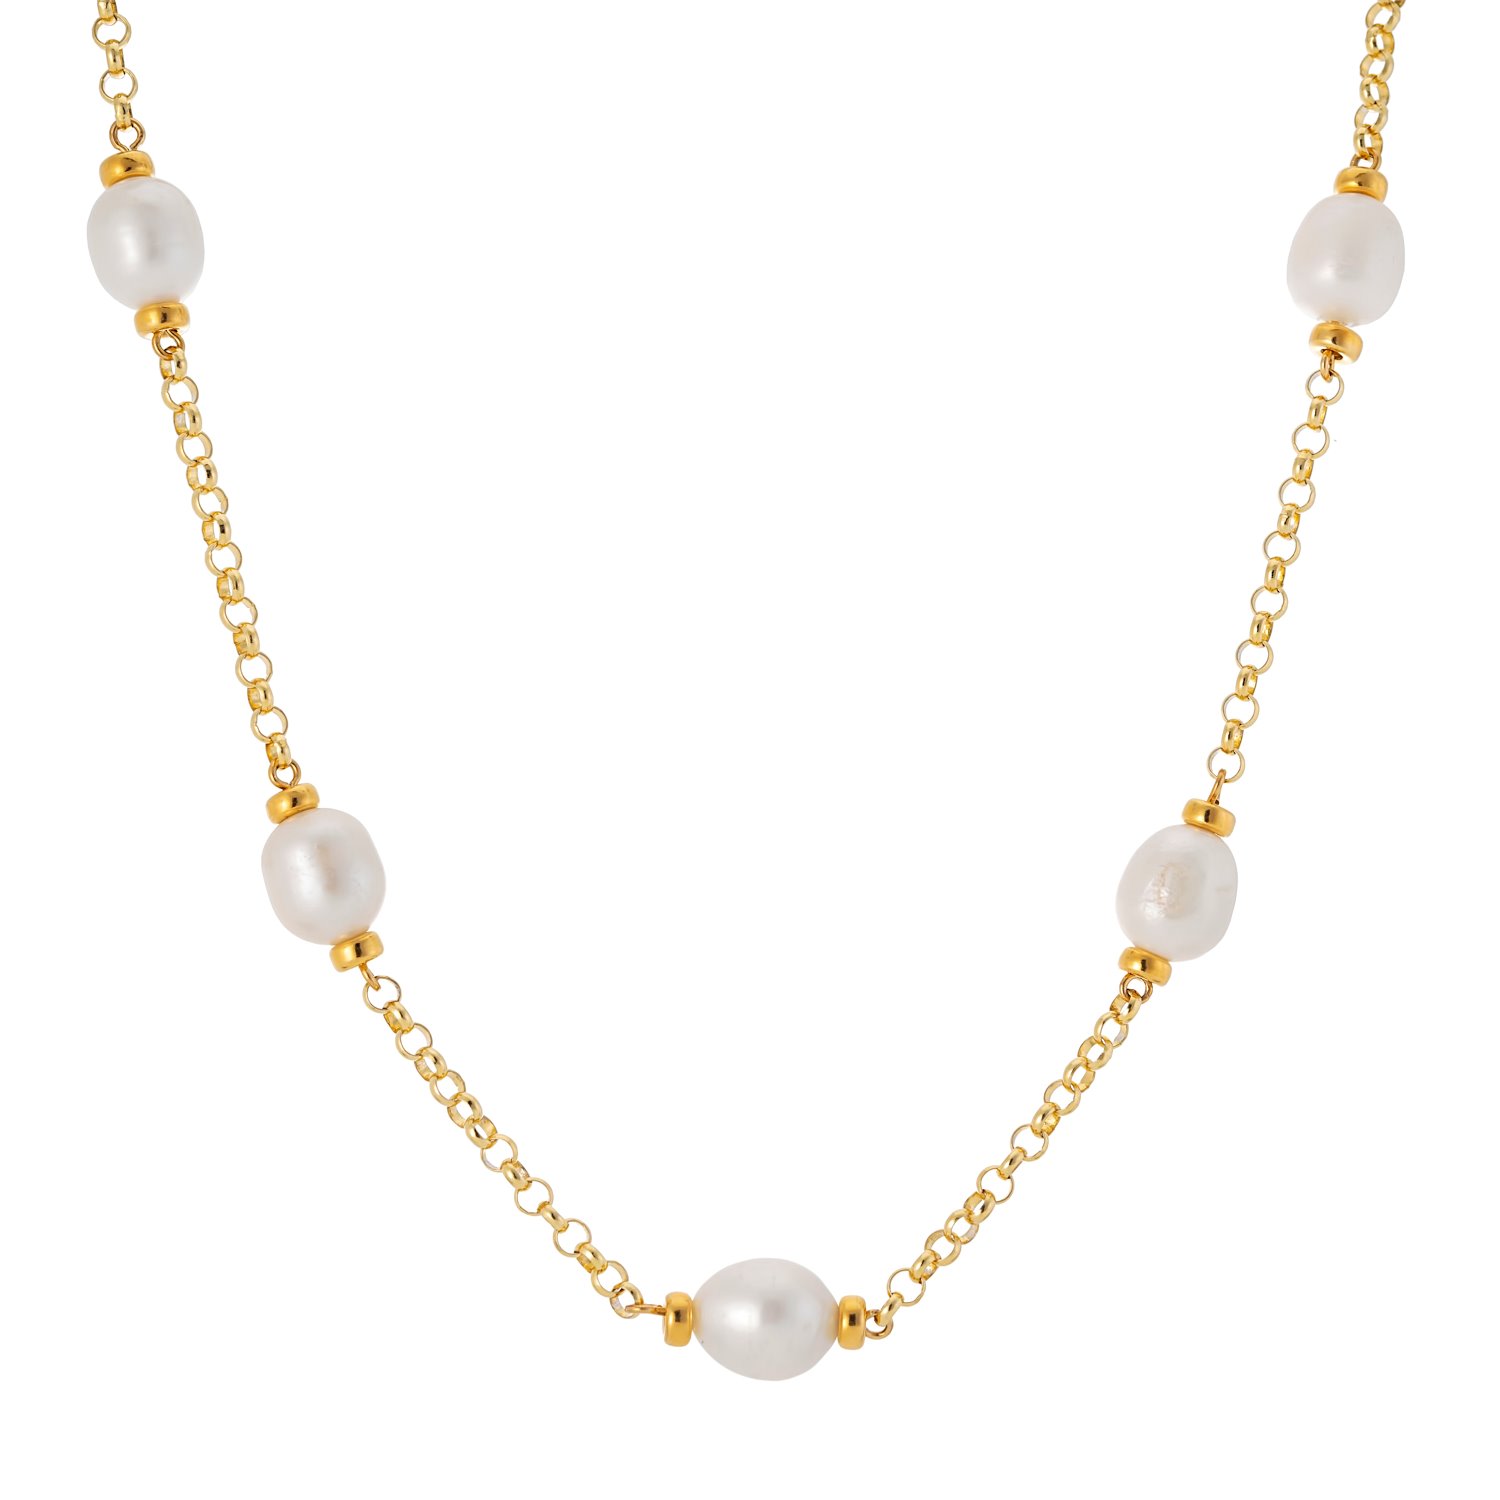 Auree Jewellery Women's White / Gold Courtfield Freshwater Pearl & Yellow Gold Vermeil Necklace